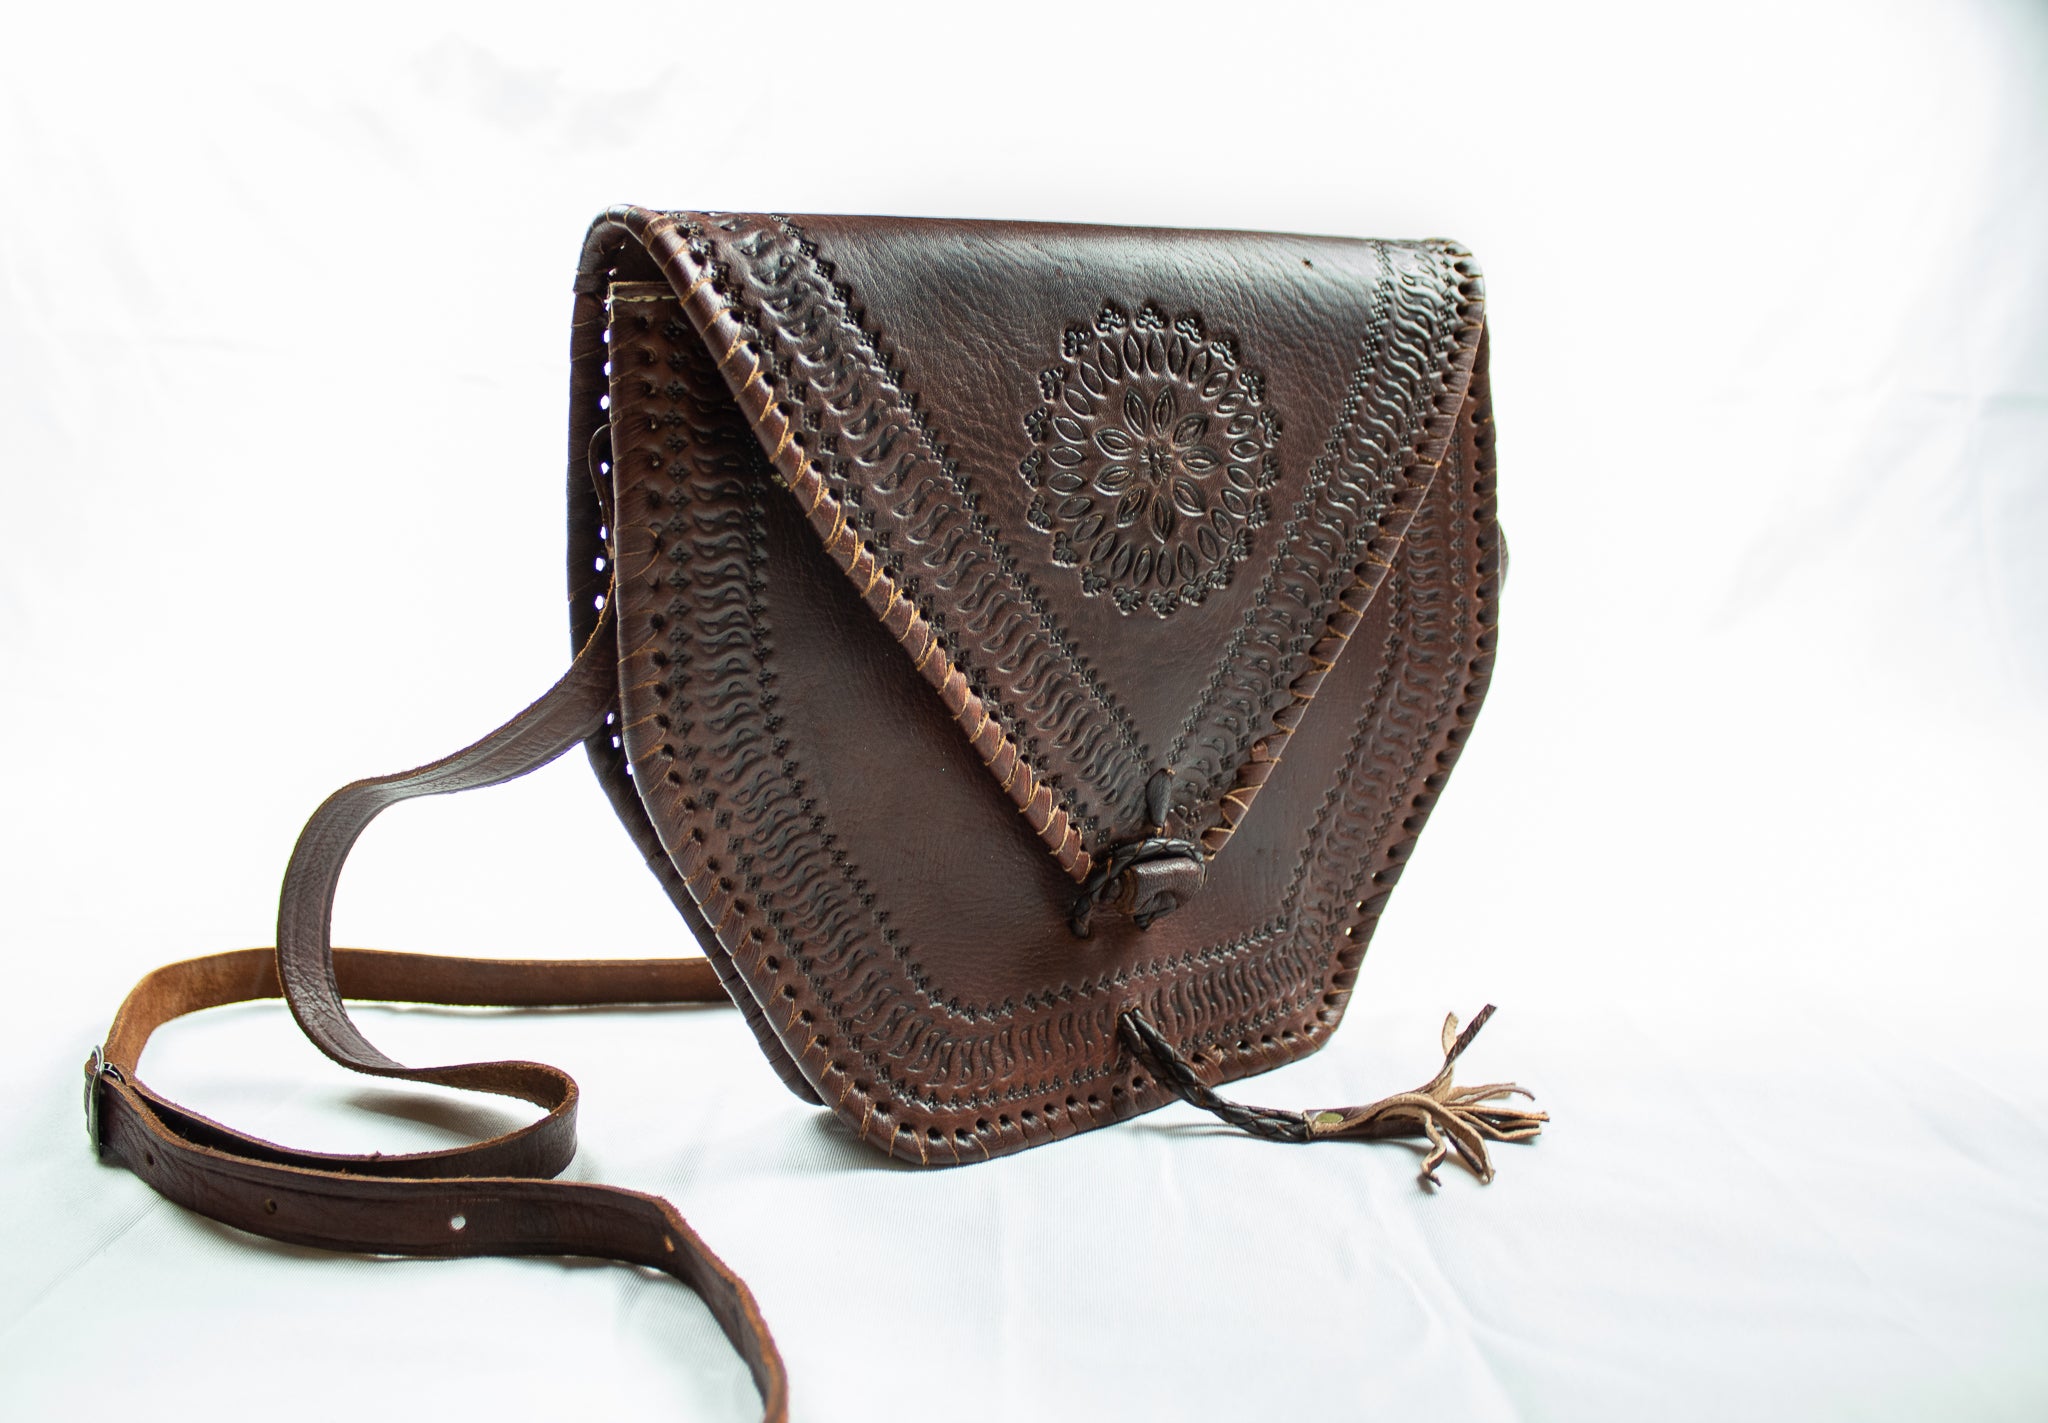 Mexican Leather Crossbody Purse, Bag, Real Leather Purse.